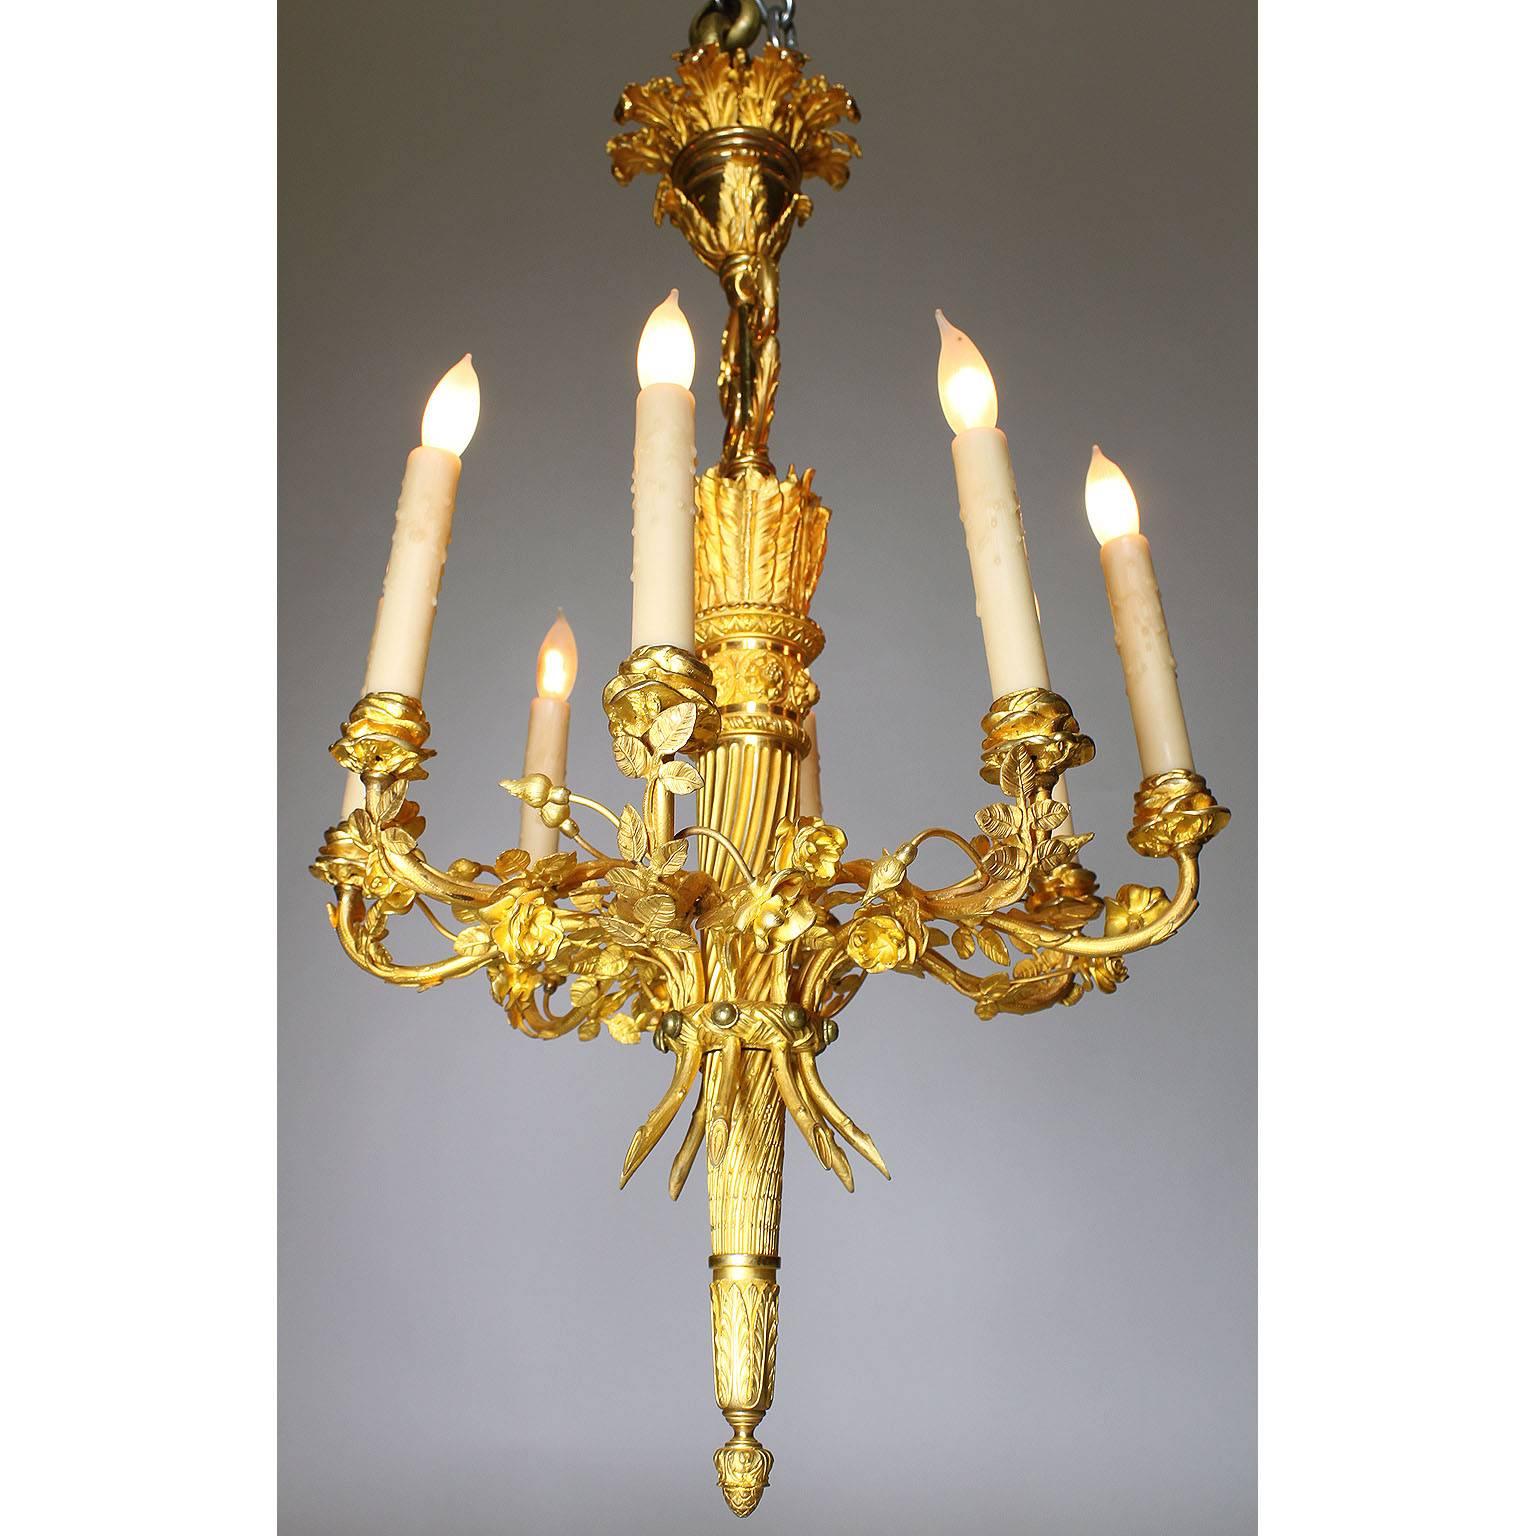 A very fine 19th century Louis XVI style gilt bronze eight-light chandelier with superb quality chasing and gilt, the arms surmounted with floral decorations in the form of a bouquet. In the style of Pierre Gouthière (French, 1732-1813), Paris,